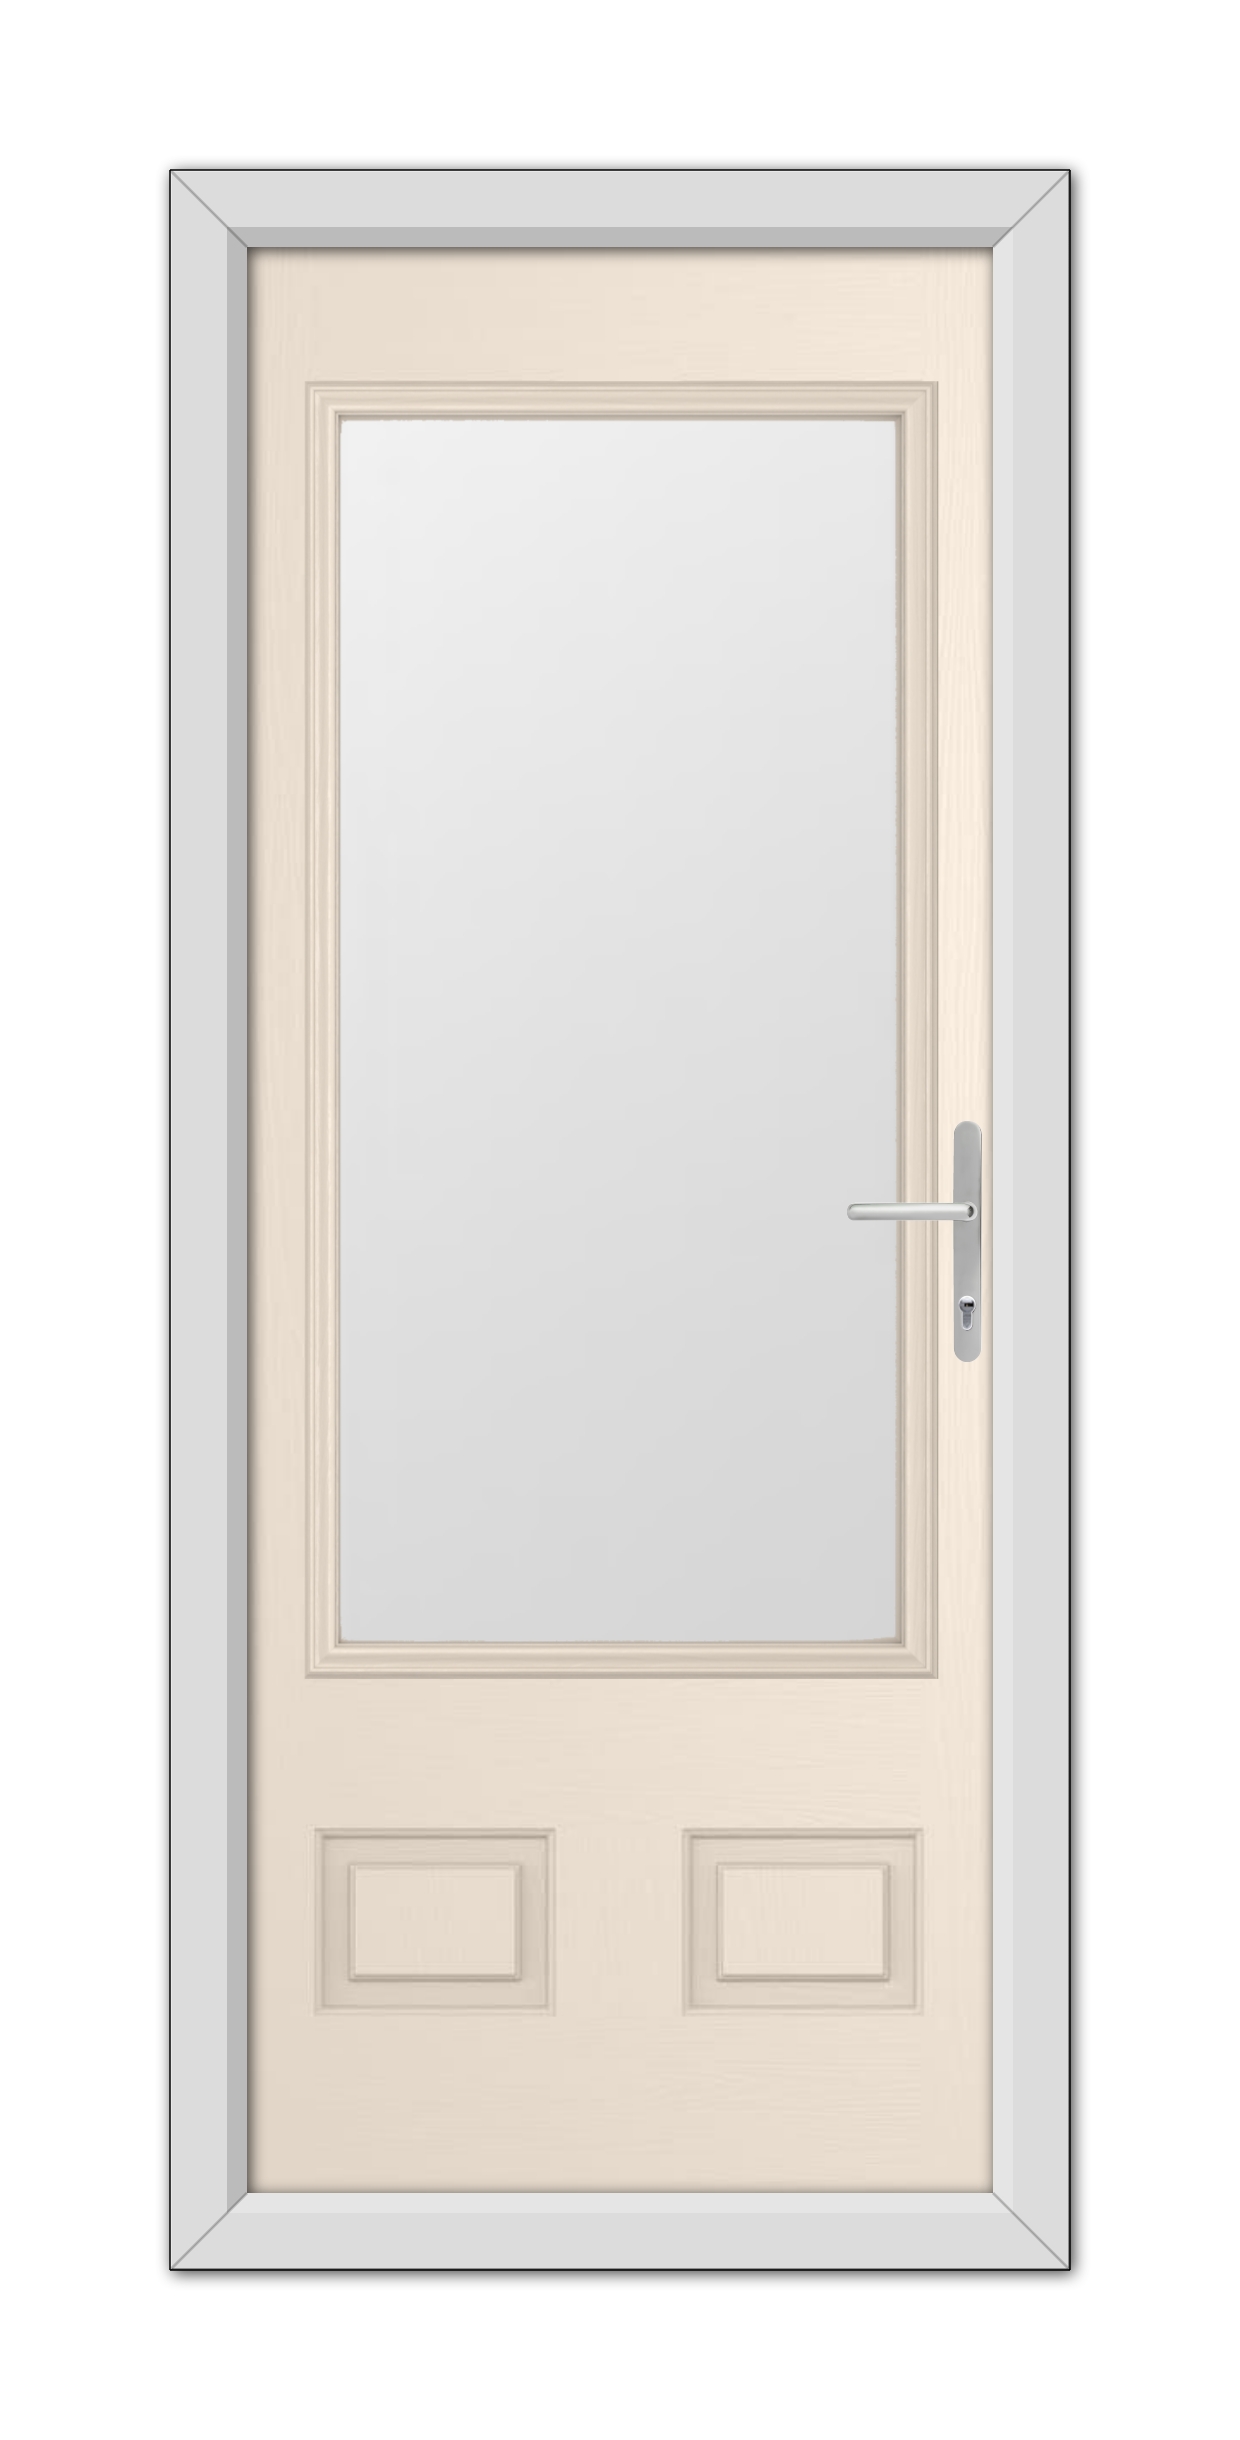 A Cream Walcot Composite Door 48mm Timber Core with a centered rectangular frosted glass panel and a metallic handle, framed within a simple trim.